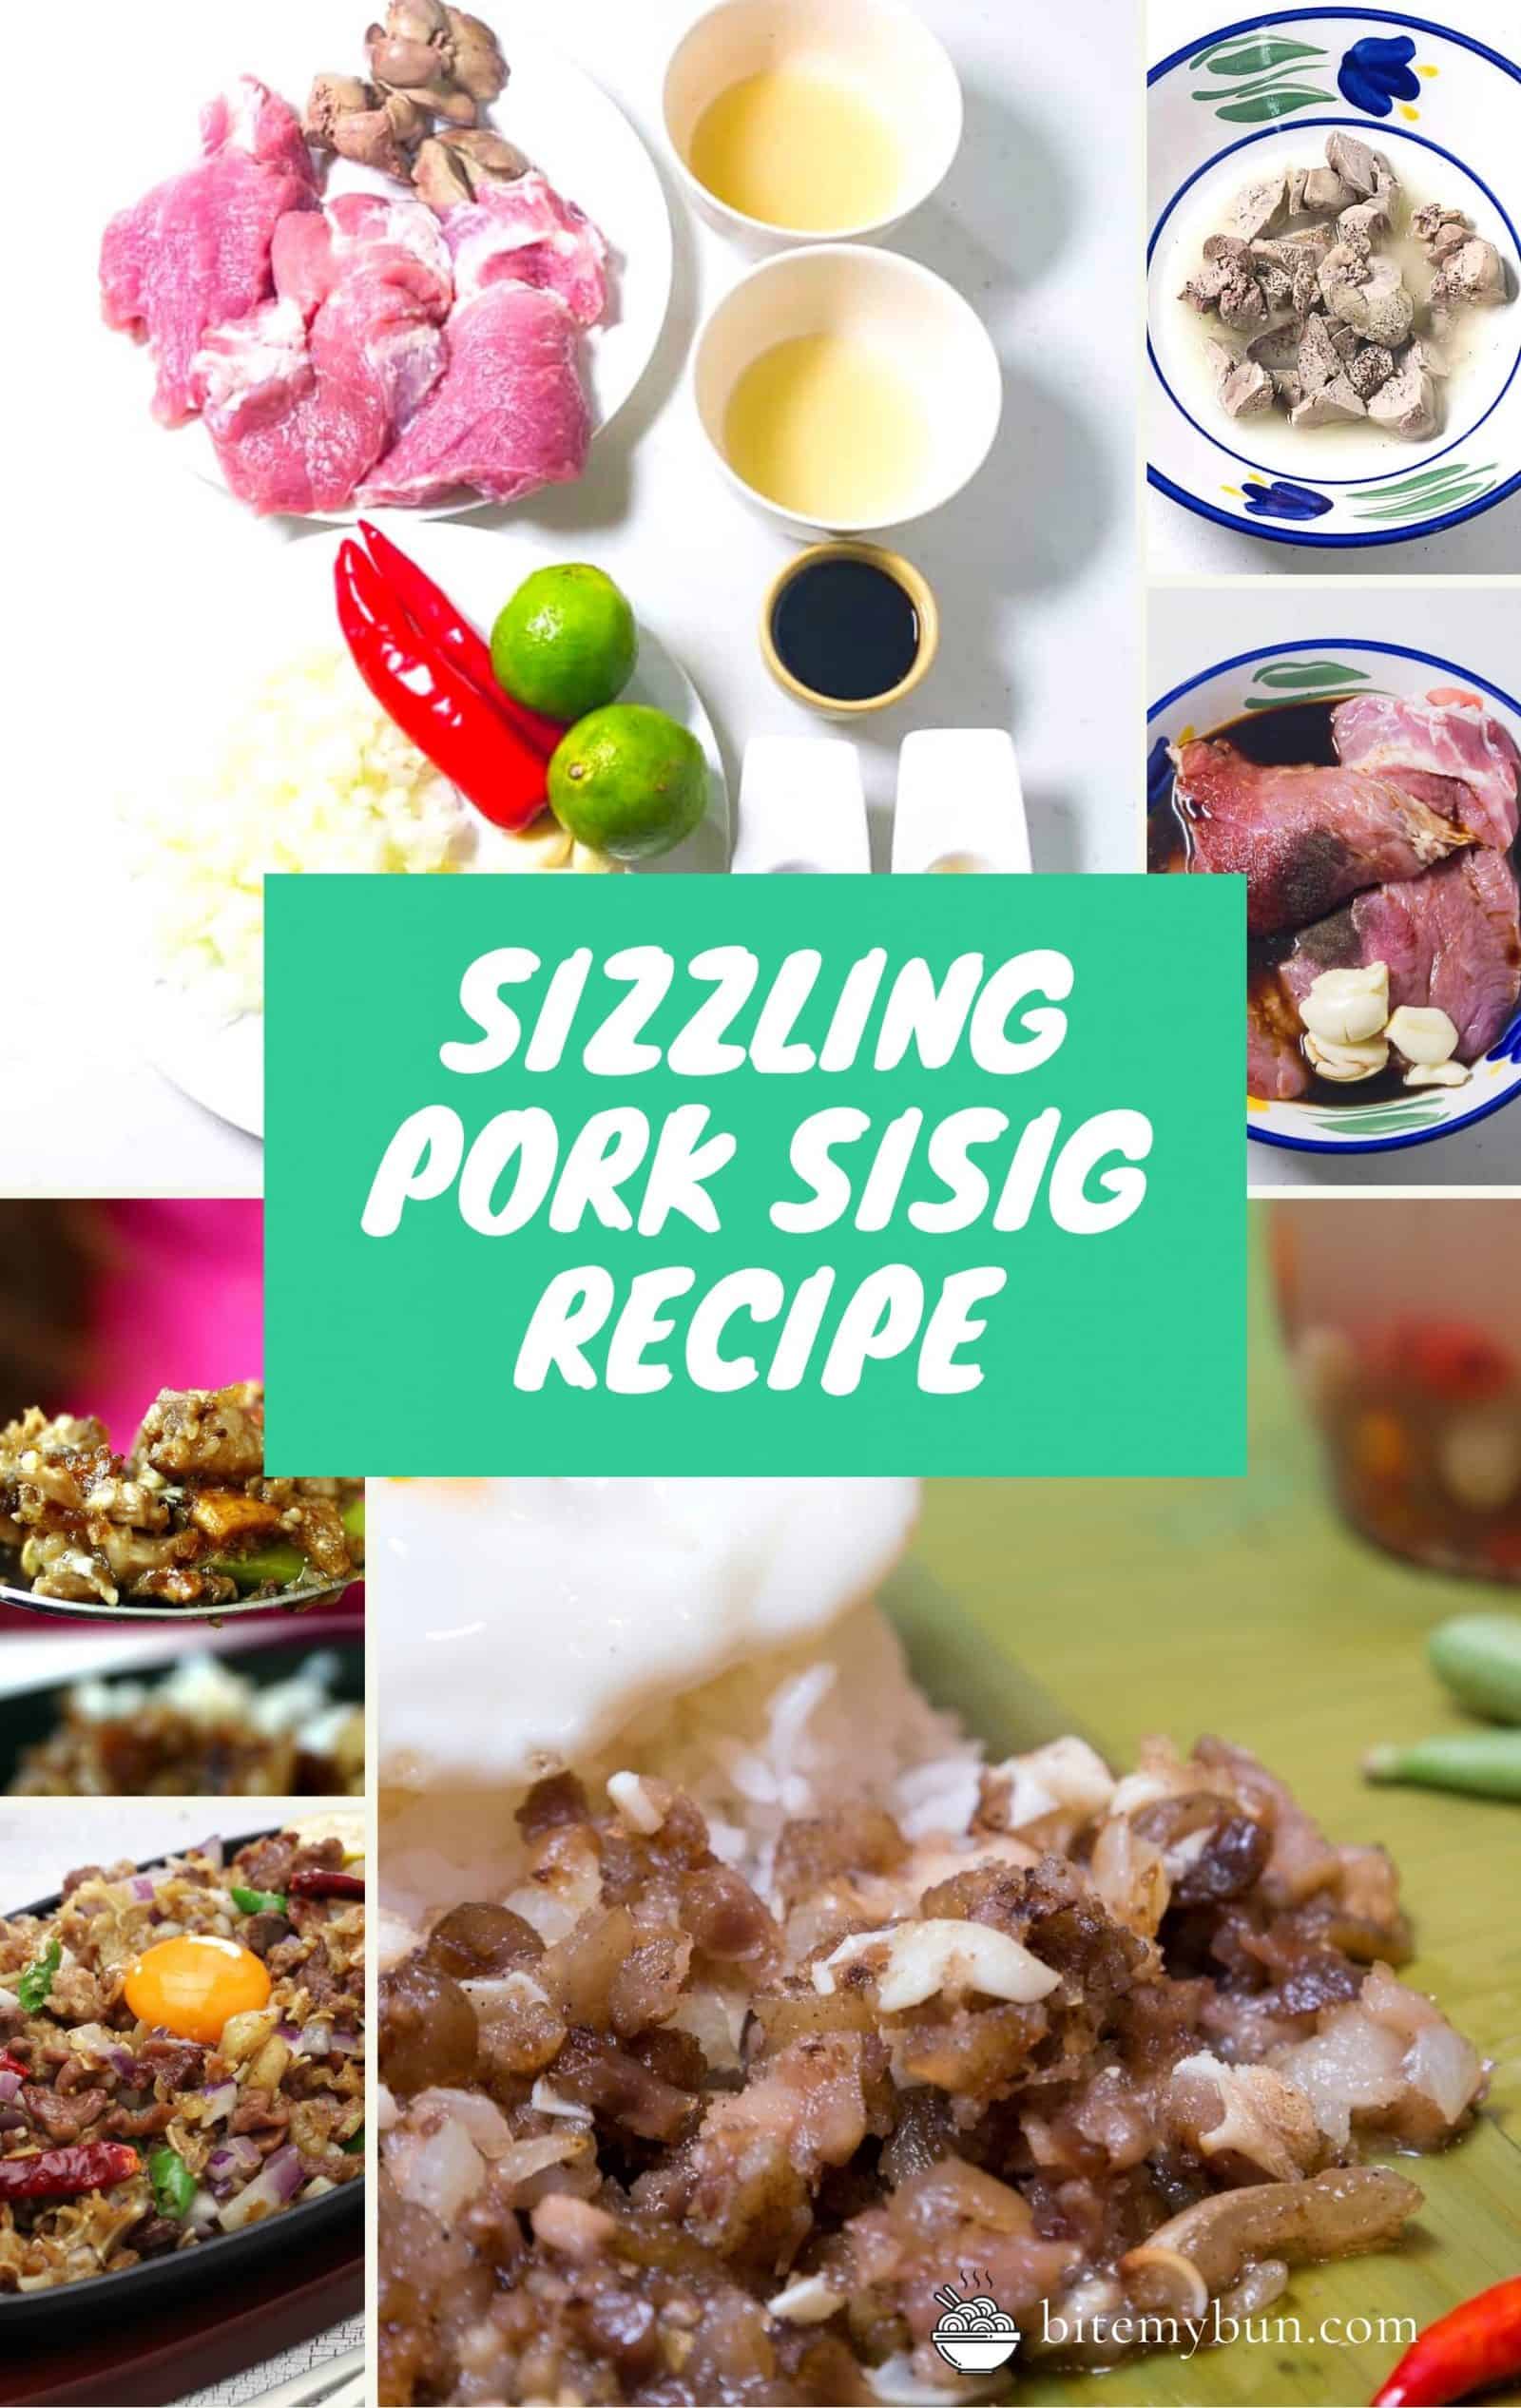 Sizzling pork sisig with chicken liver recipe